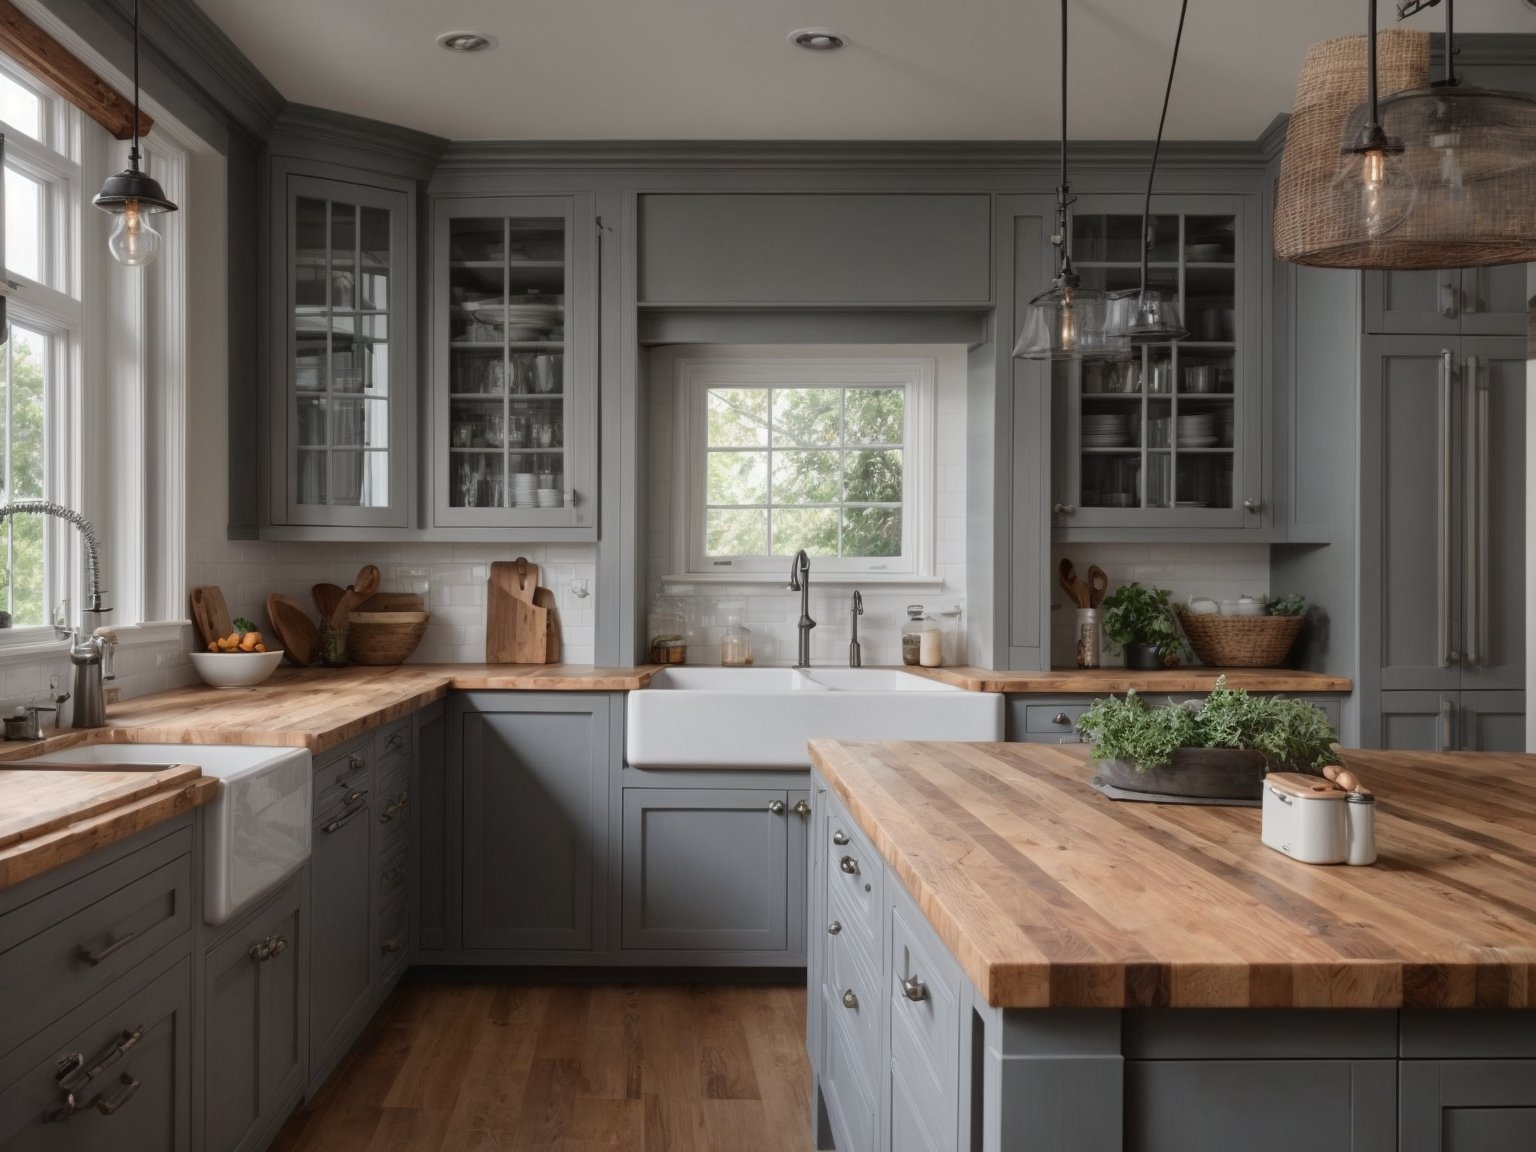 A stylish and modern farmhouse kitchen with grey cabinets and butcher block countertops, adding warmth and character to the space.